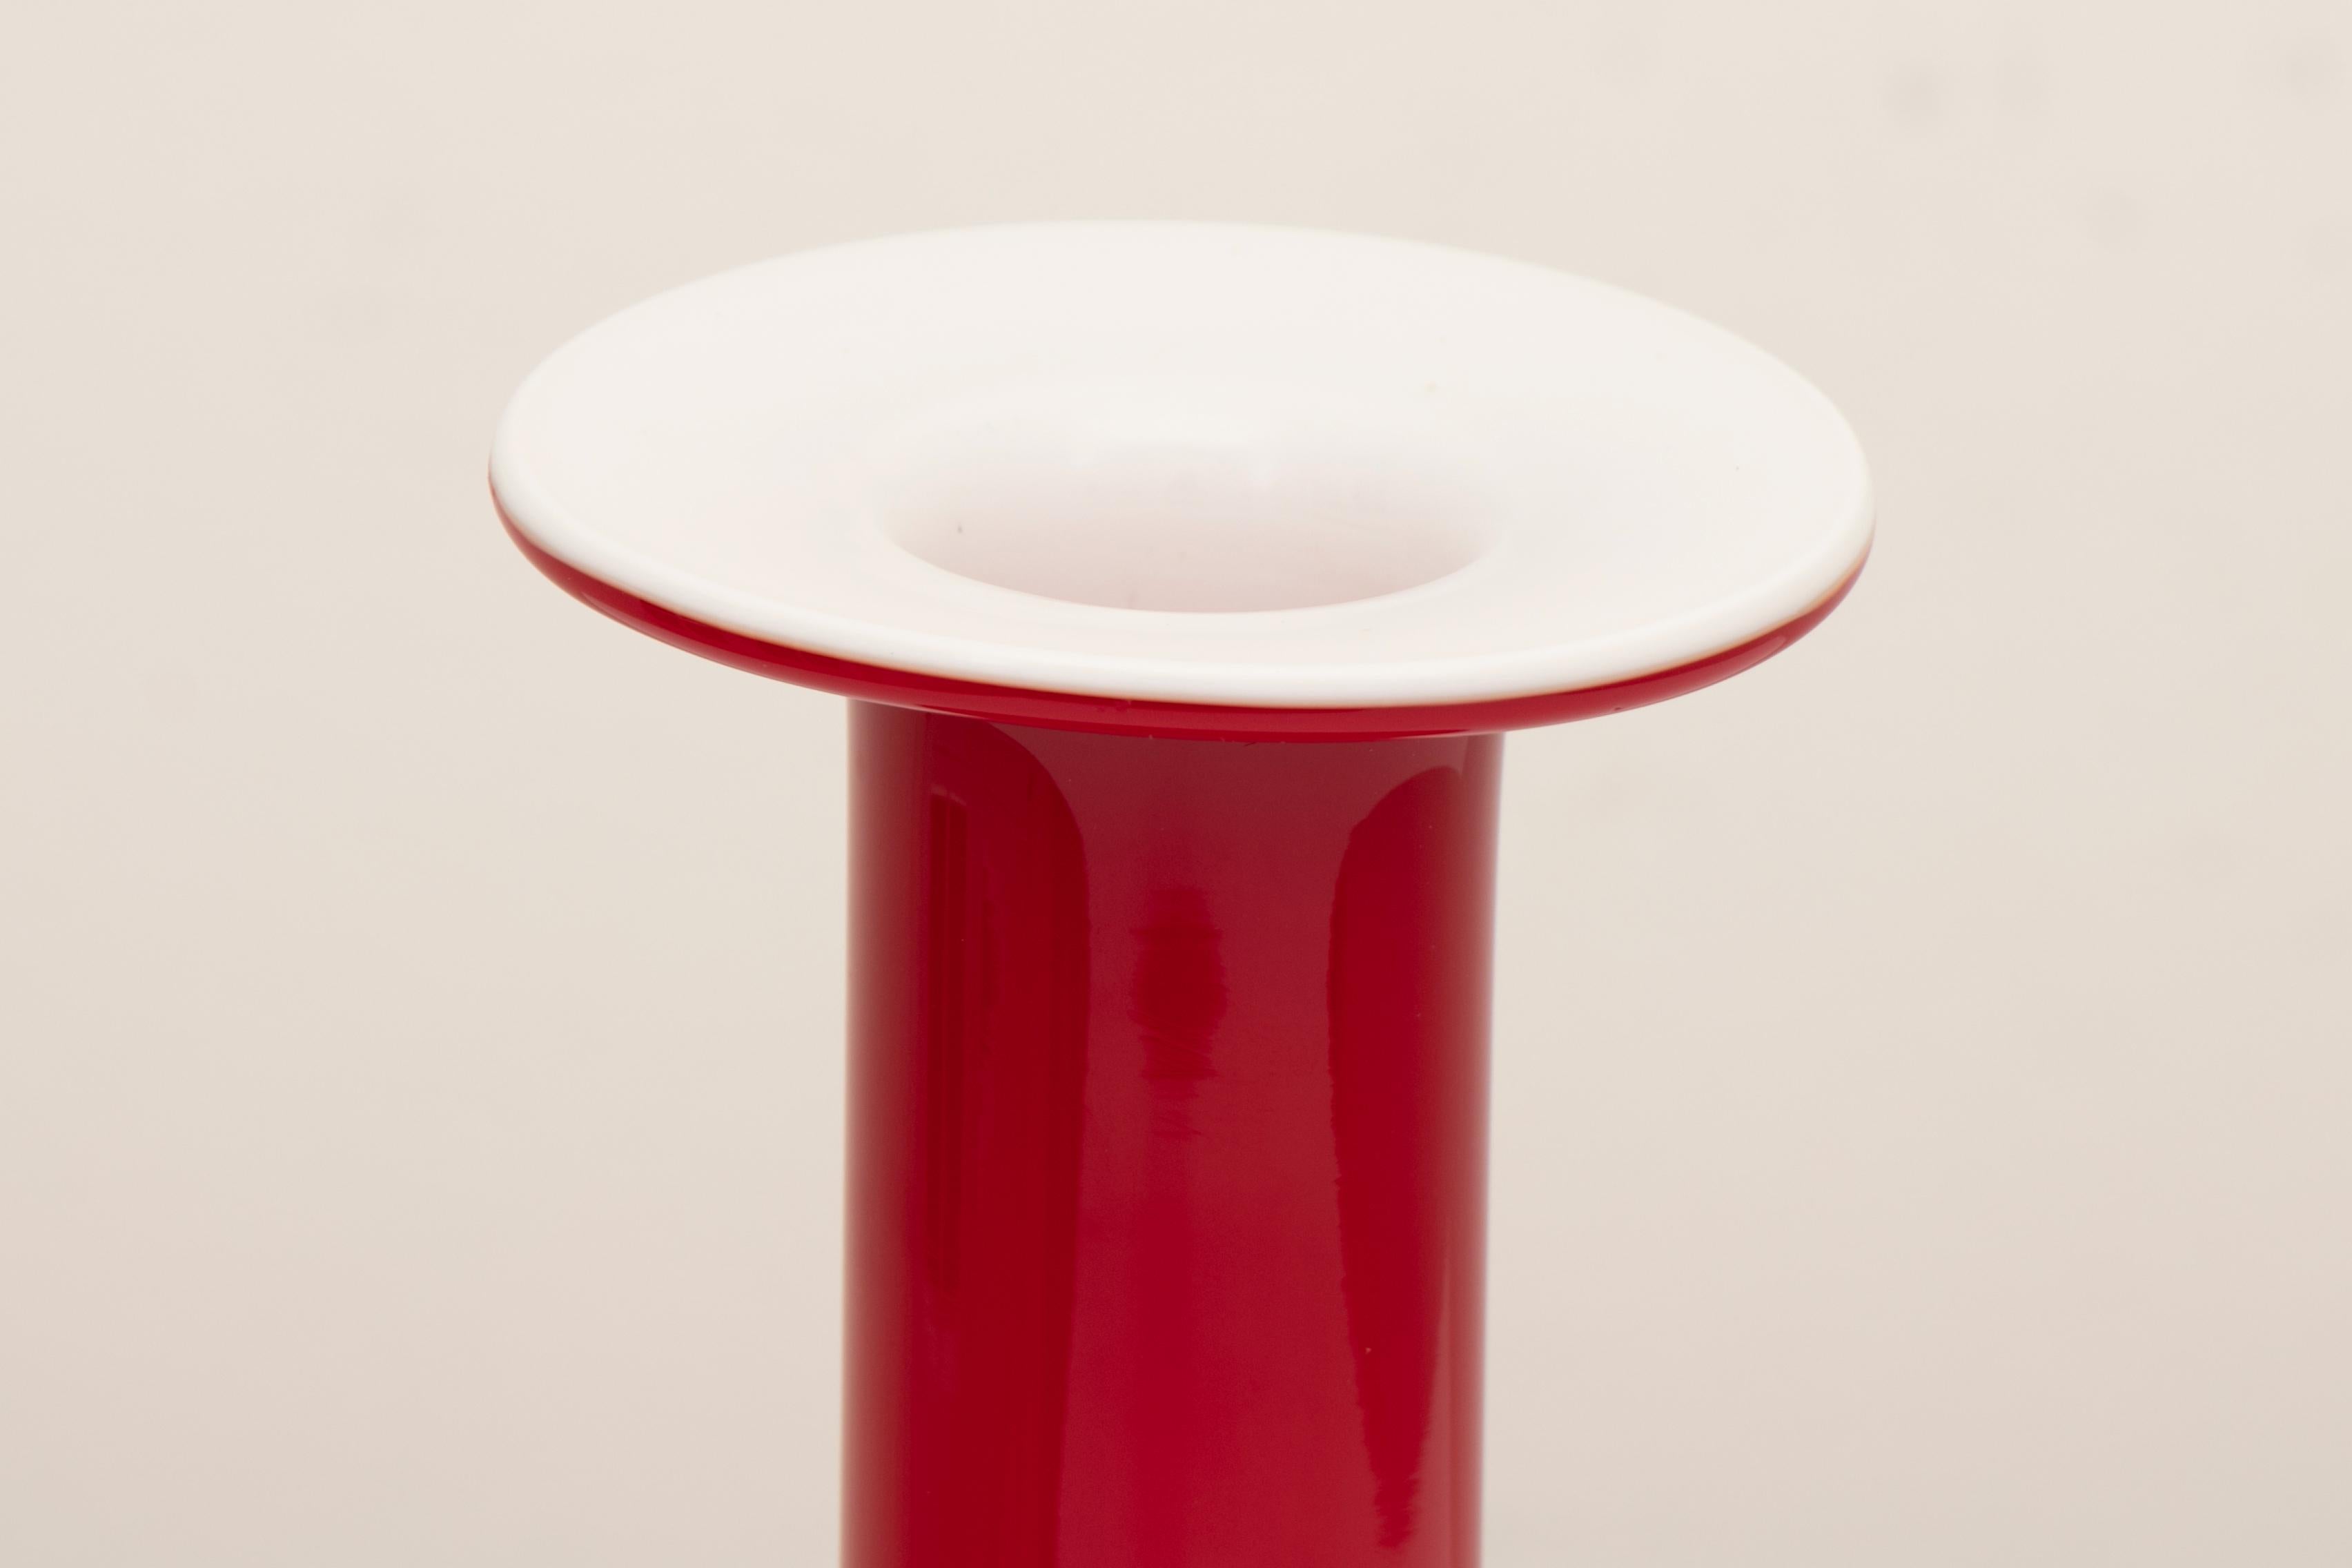 1960s Danish Holmegaard Gulvase in a stunning vivid red with an encased white contrasting interior. Designed by Otto Brauer for Kastrup Holmegaard. The original label is still intact as shown in the images.

Measures: H 36.5 cm, W 15 cm, D 15 cm.